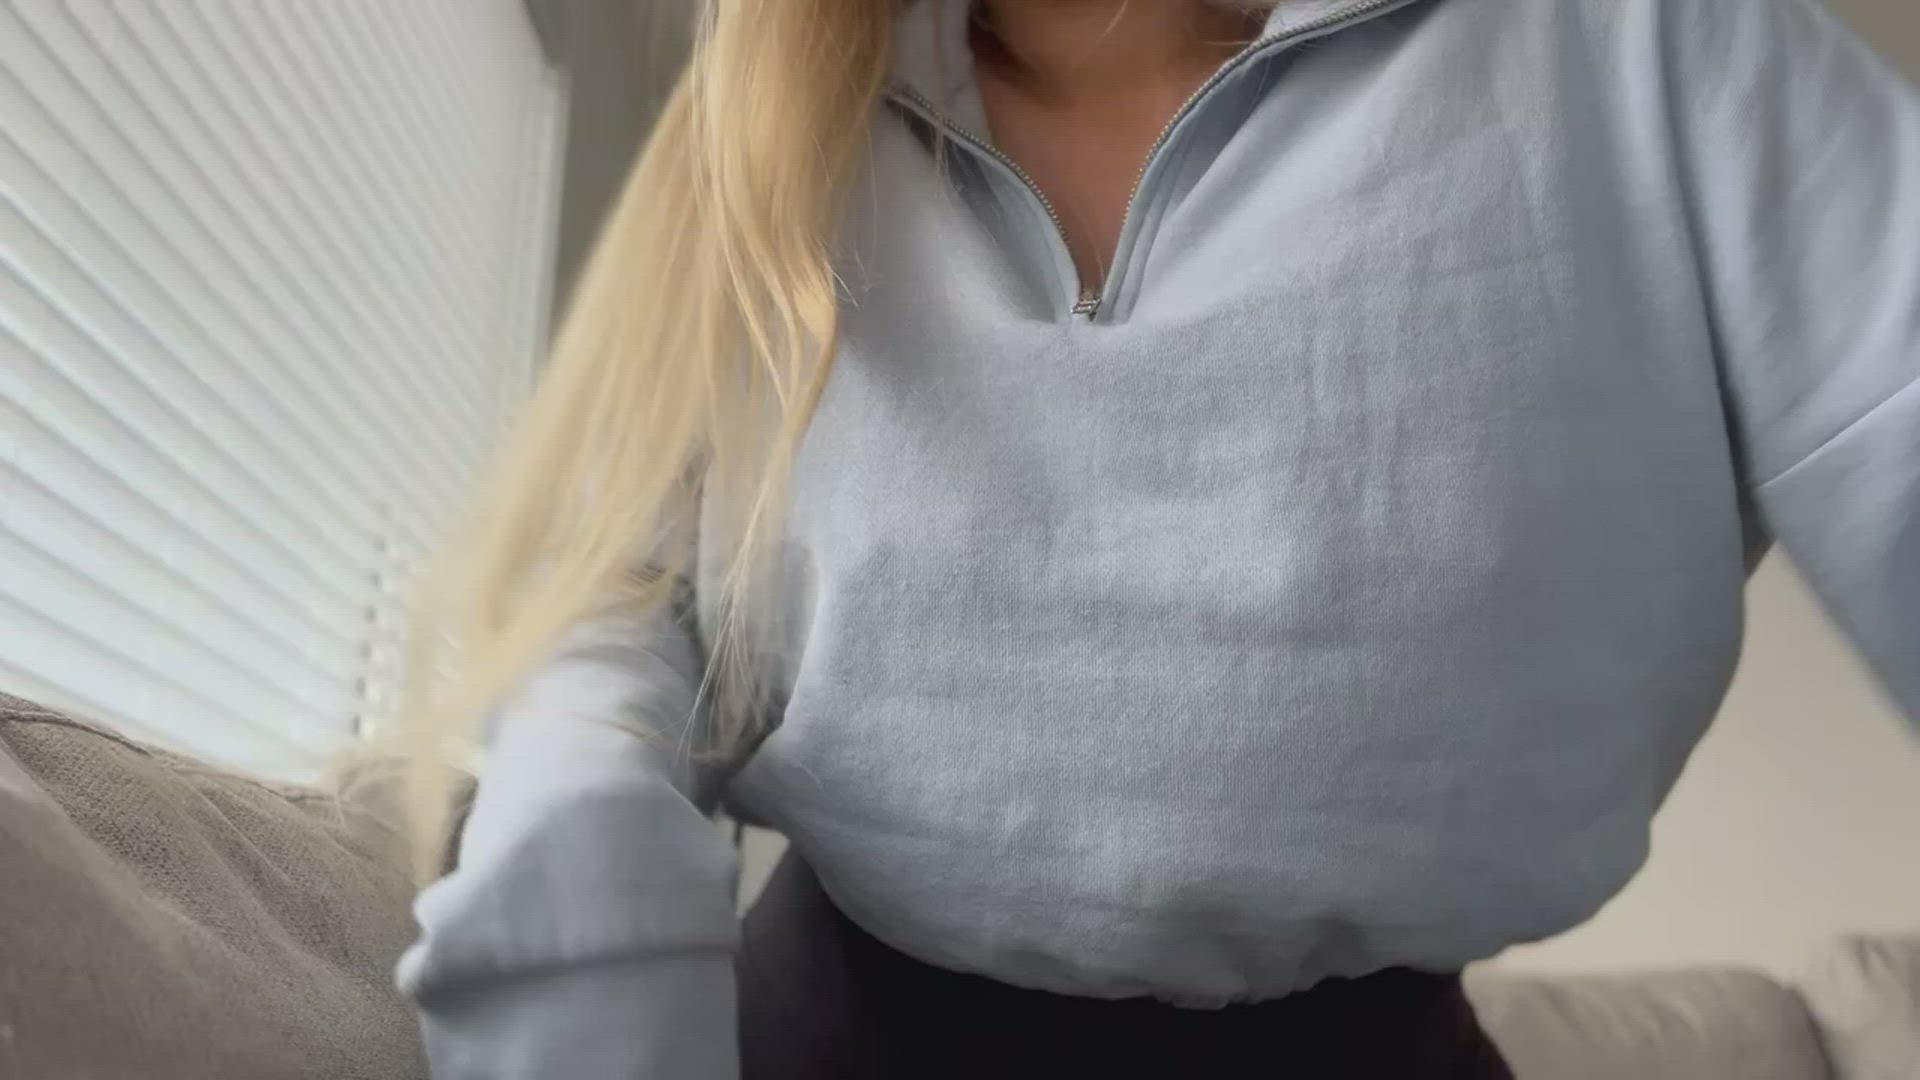 Titty Drop porn video with onlyfans model bratttybabexxx <strong>@bratttybabexxx</strong>